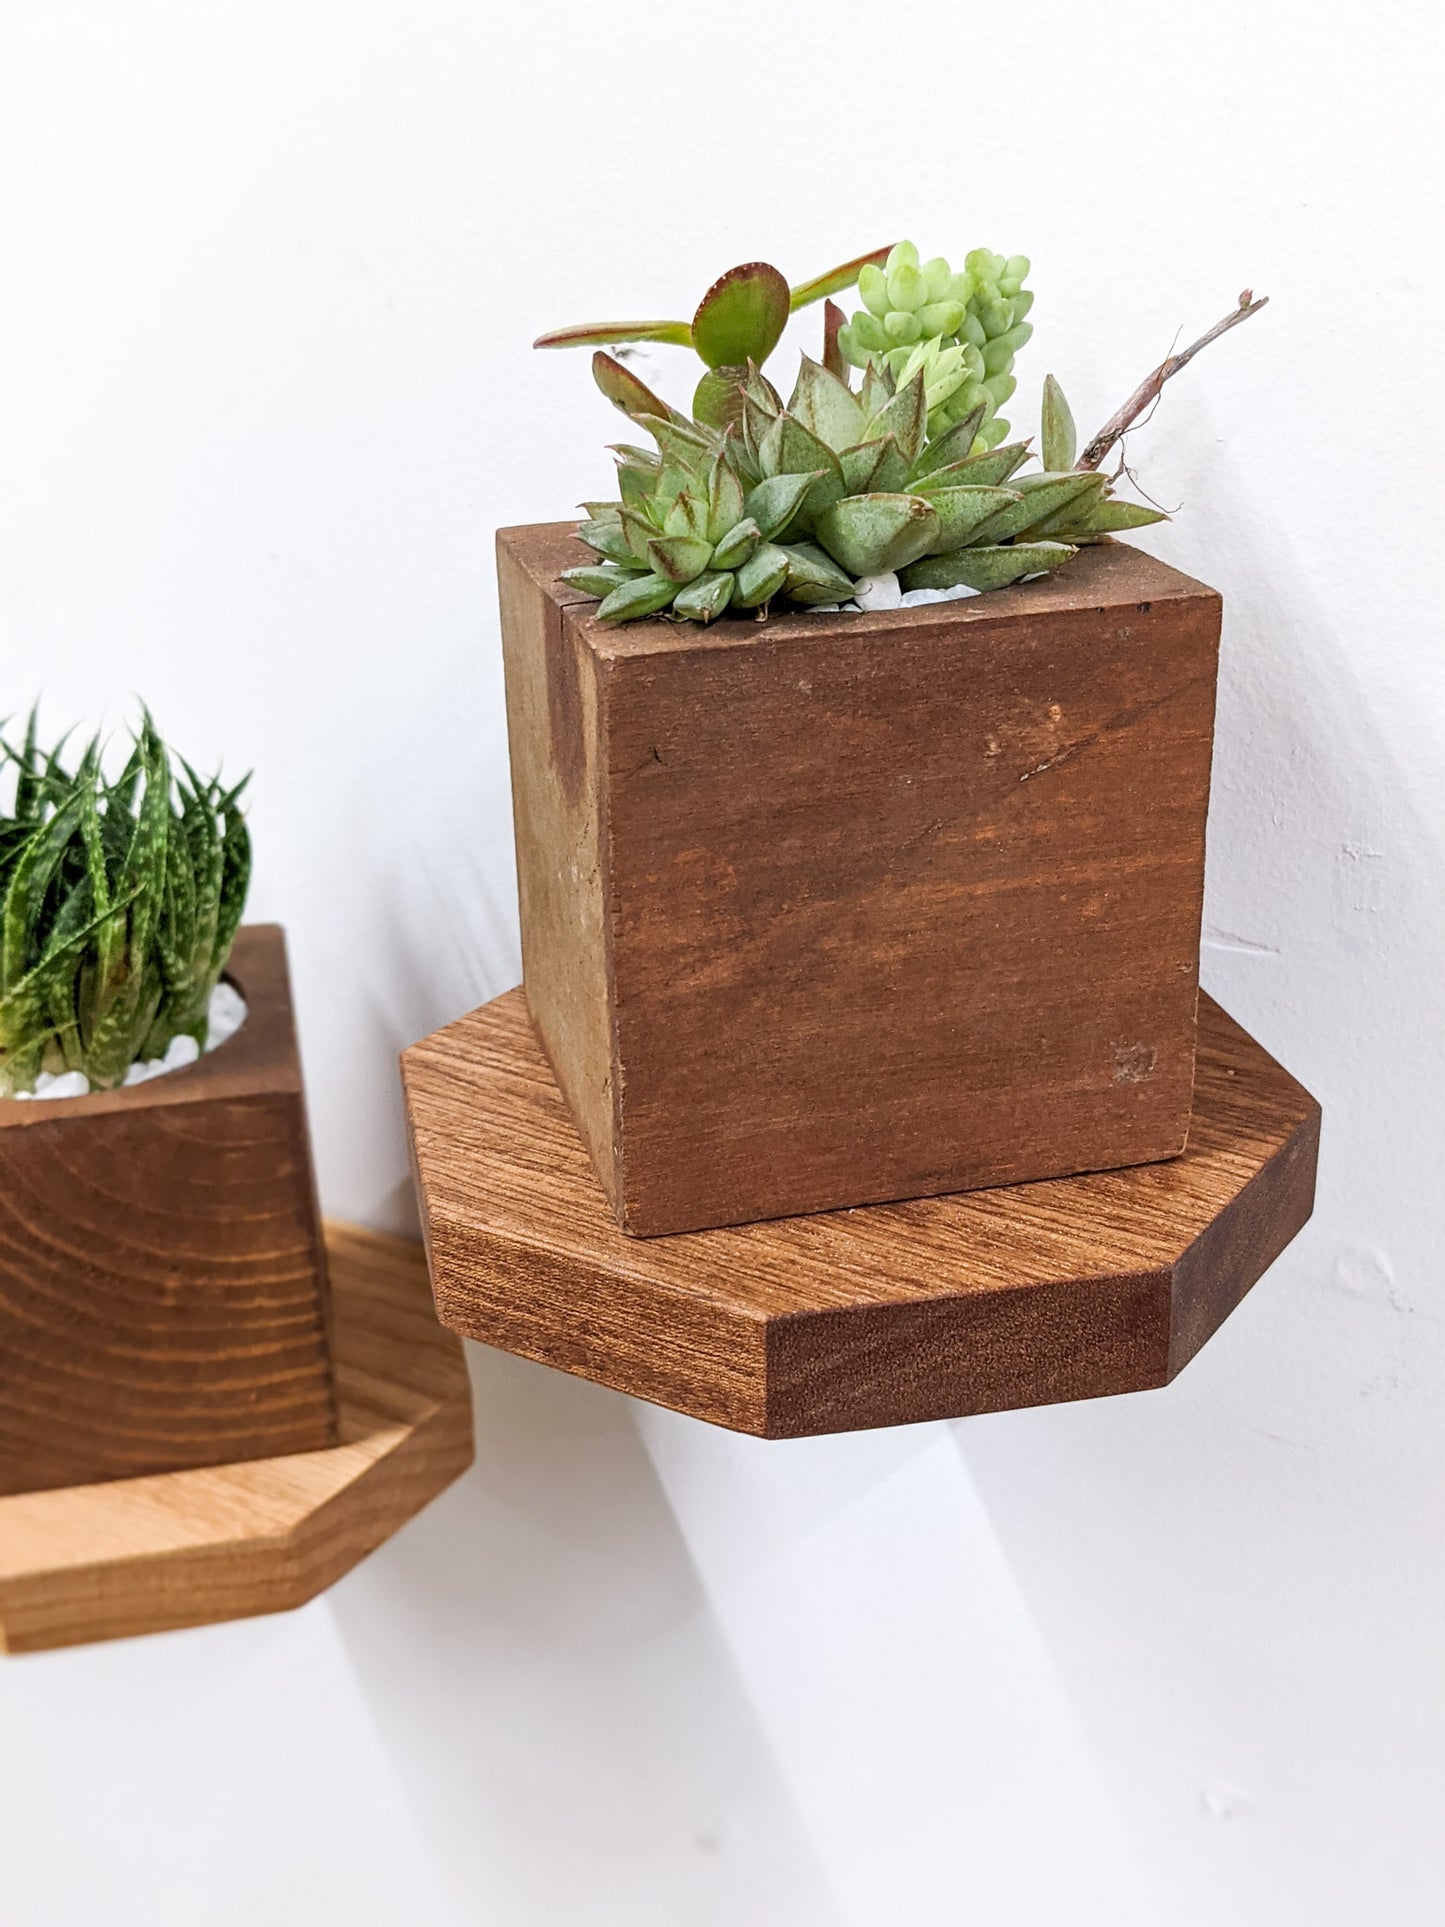 Our small octagon floating shelf in mahogany holds a square wooden succulent planter. To the left, an oak octagon floating shelf holds a succulent.